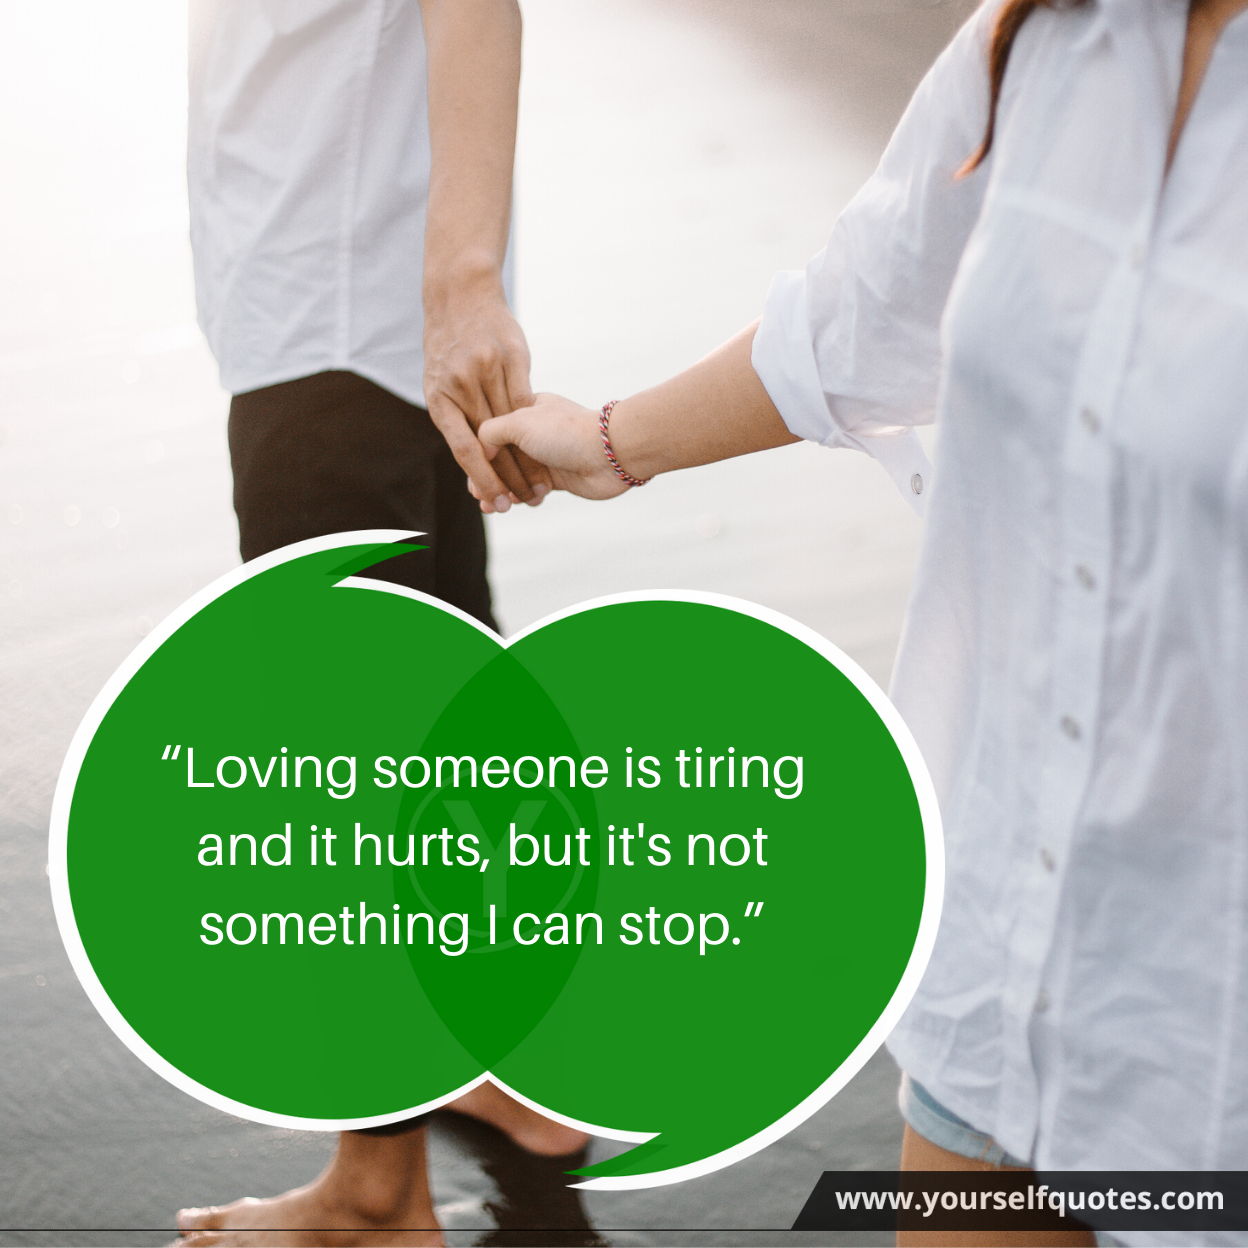 Quotes on Loveing